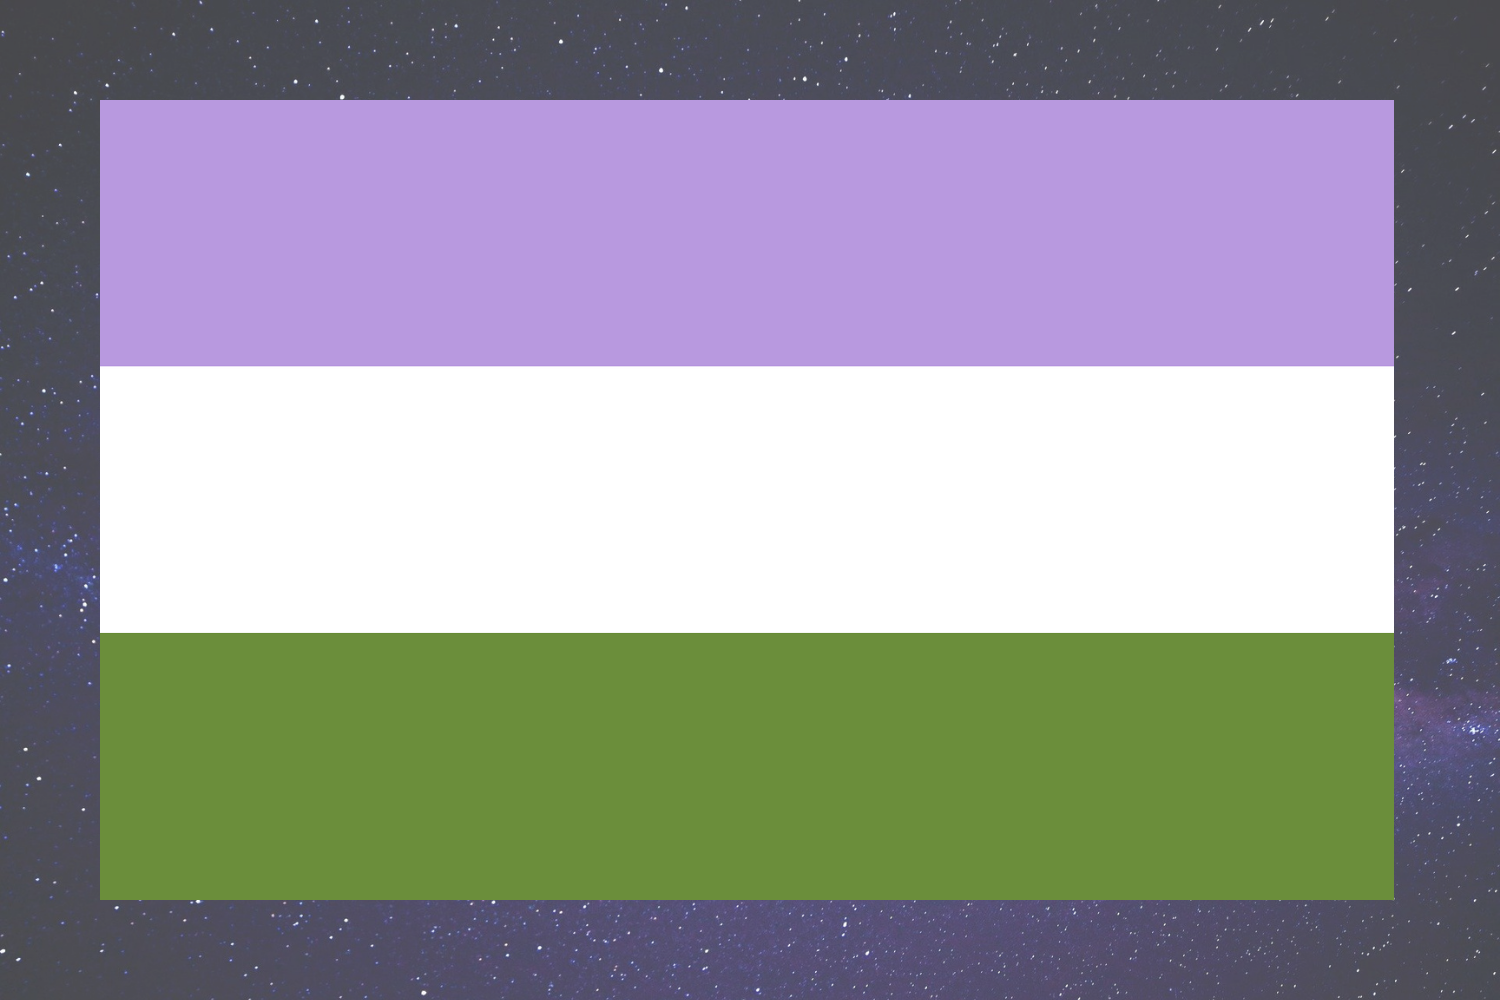 The Genderqueer Flag - A flag with 3 horizontal stripes: top to bottom: lavender, white, and dark chartreuse green. The lavender represents the mixing of masc and femme to represent people who align with a binary gender spectrum. The white represents those who are agender or gender neutral. The green represents those who identify outside of the binary gender spectrum.